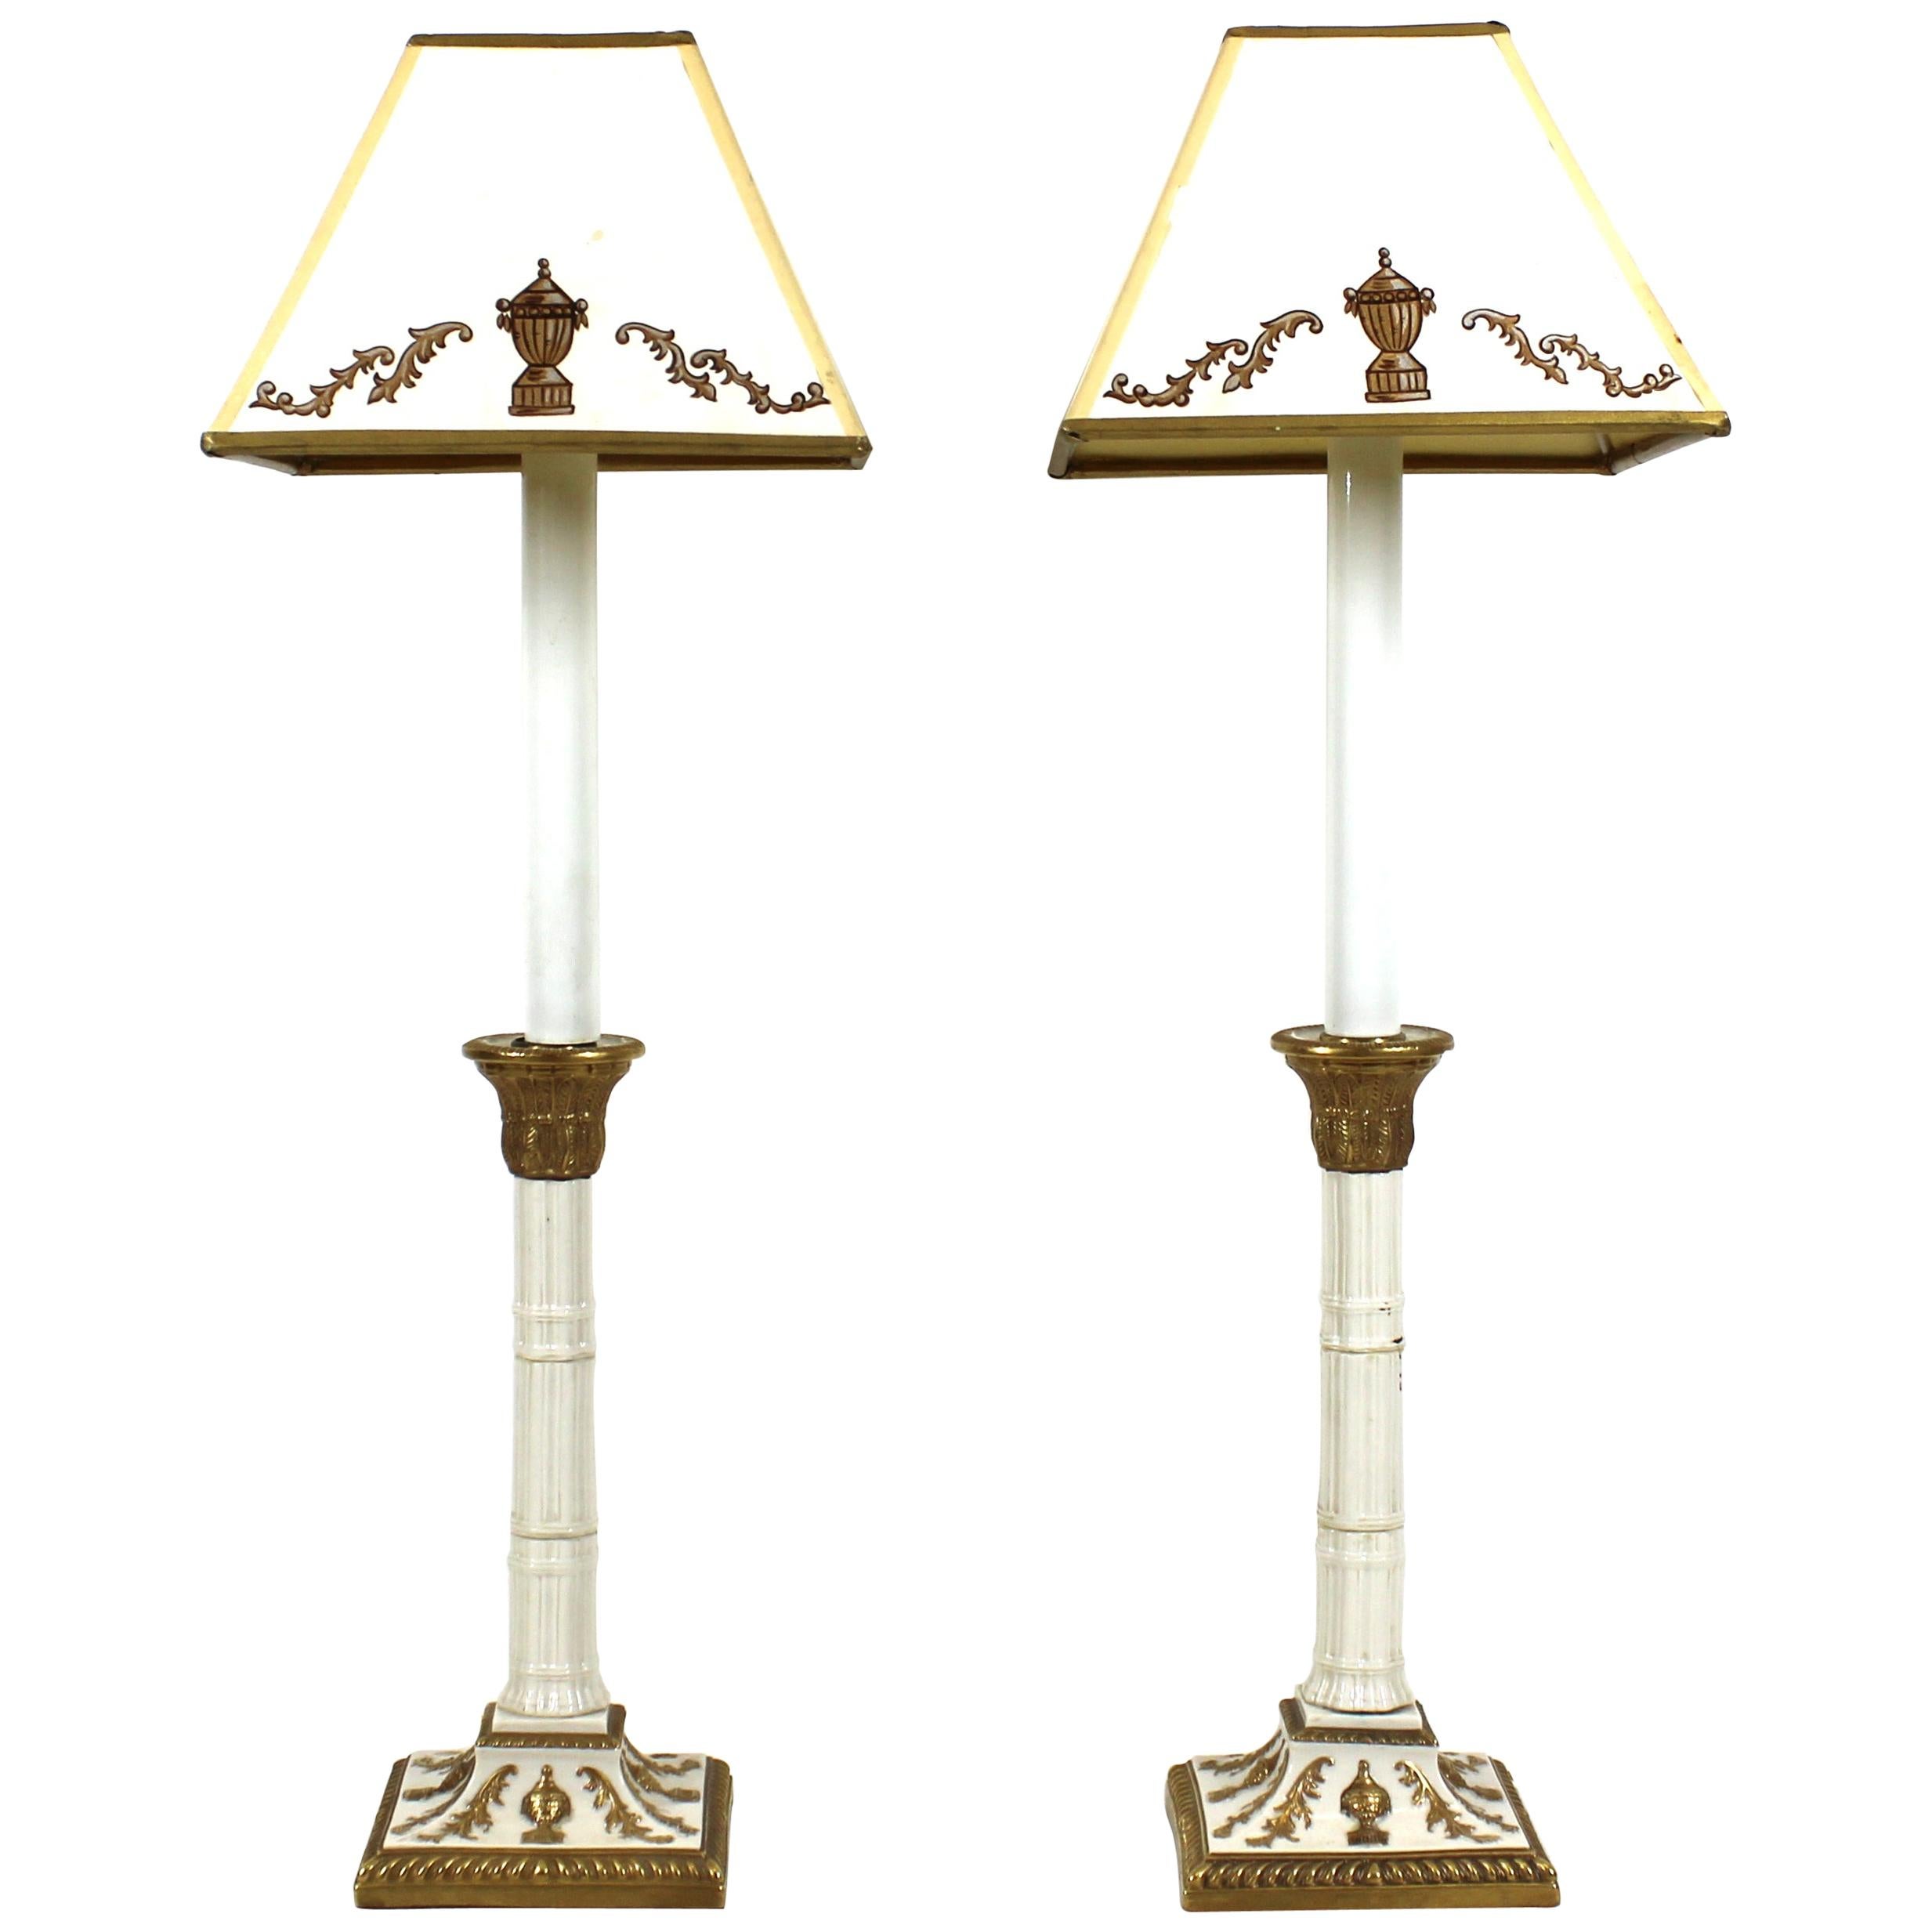 Neoclassical Revival Manner Porcelain Table Lamps For Sale